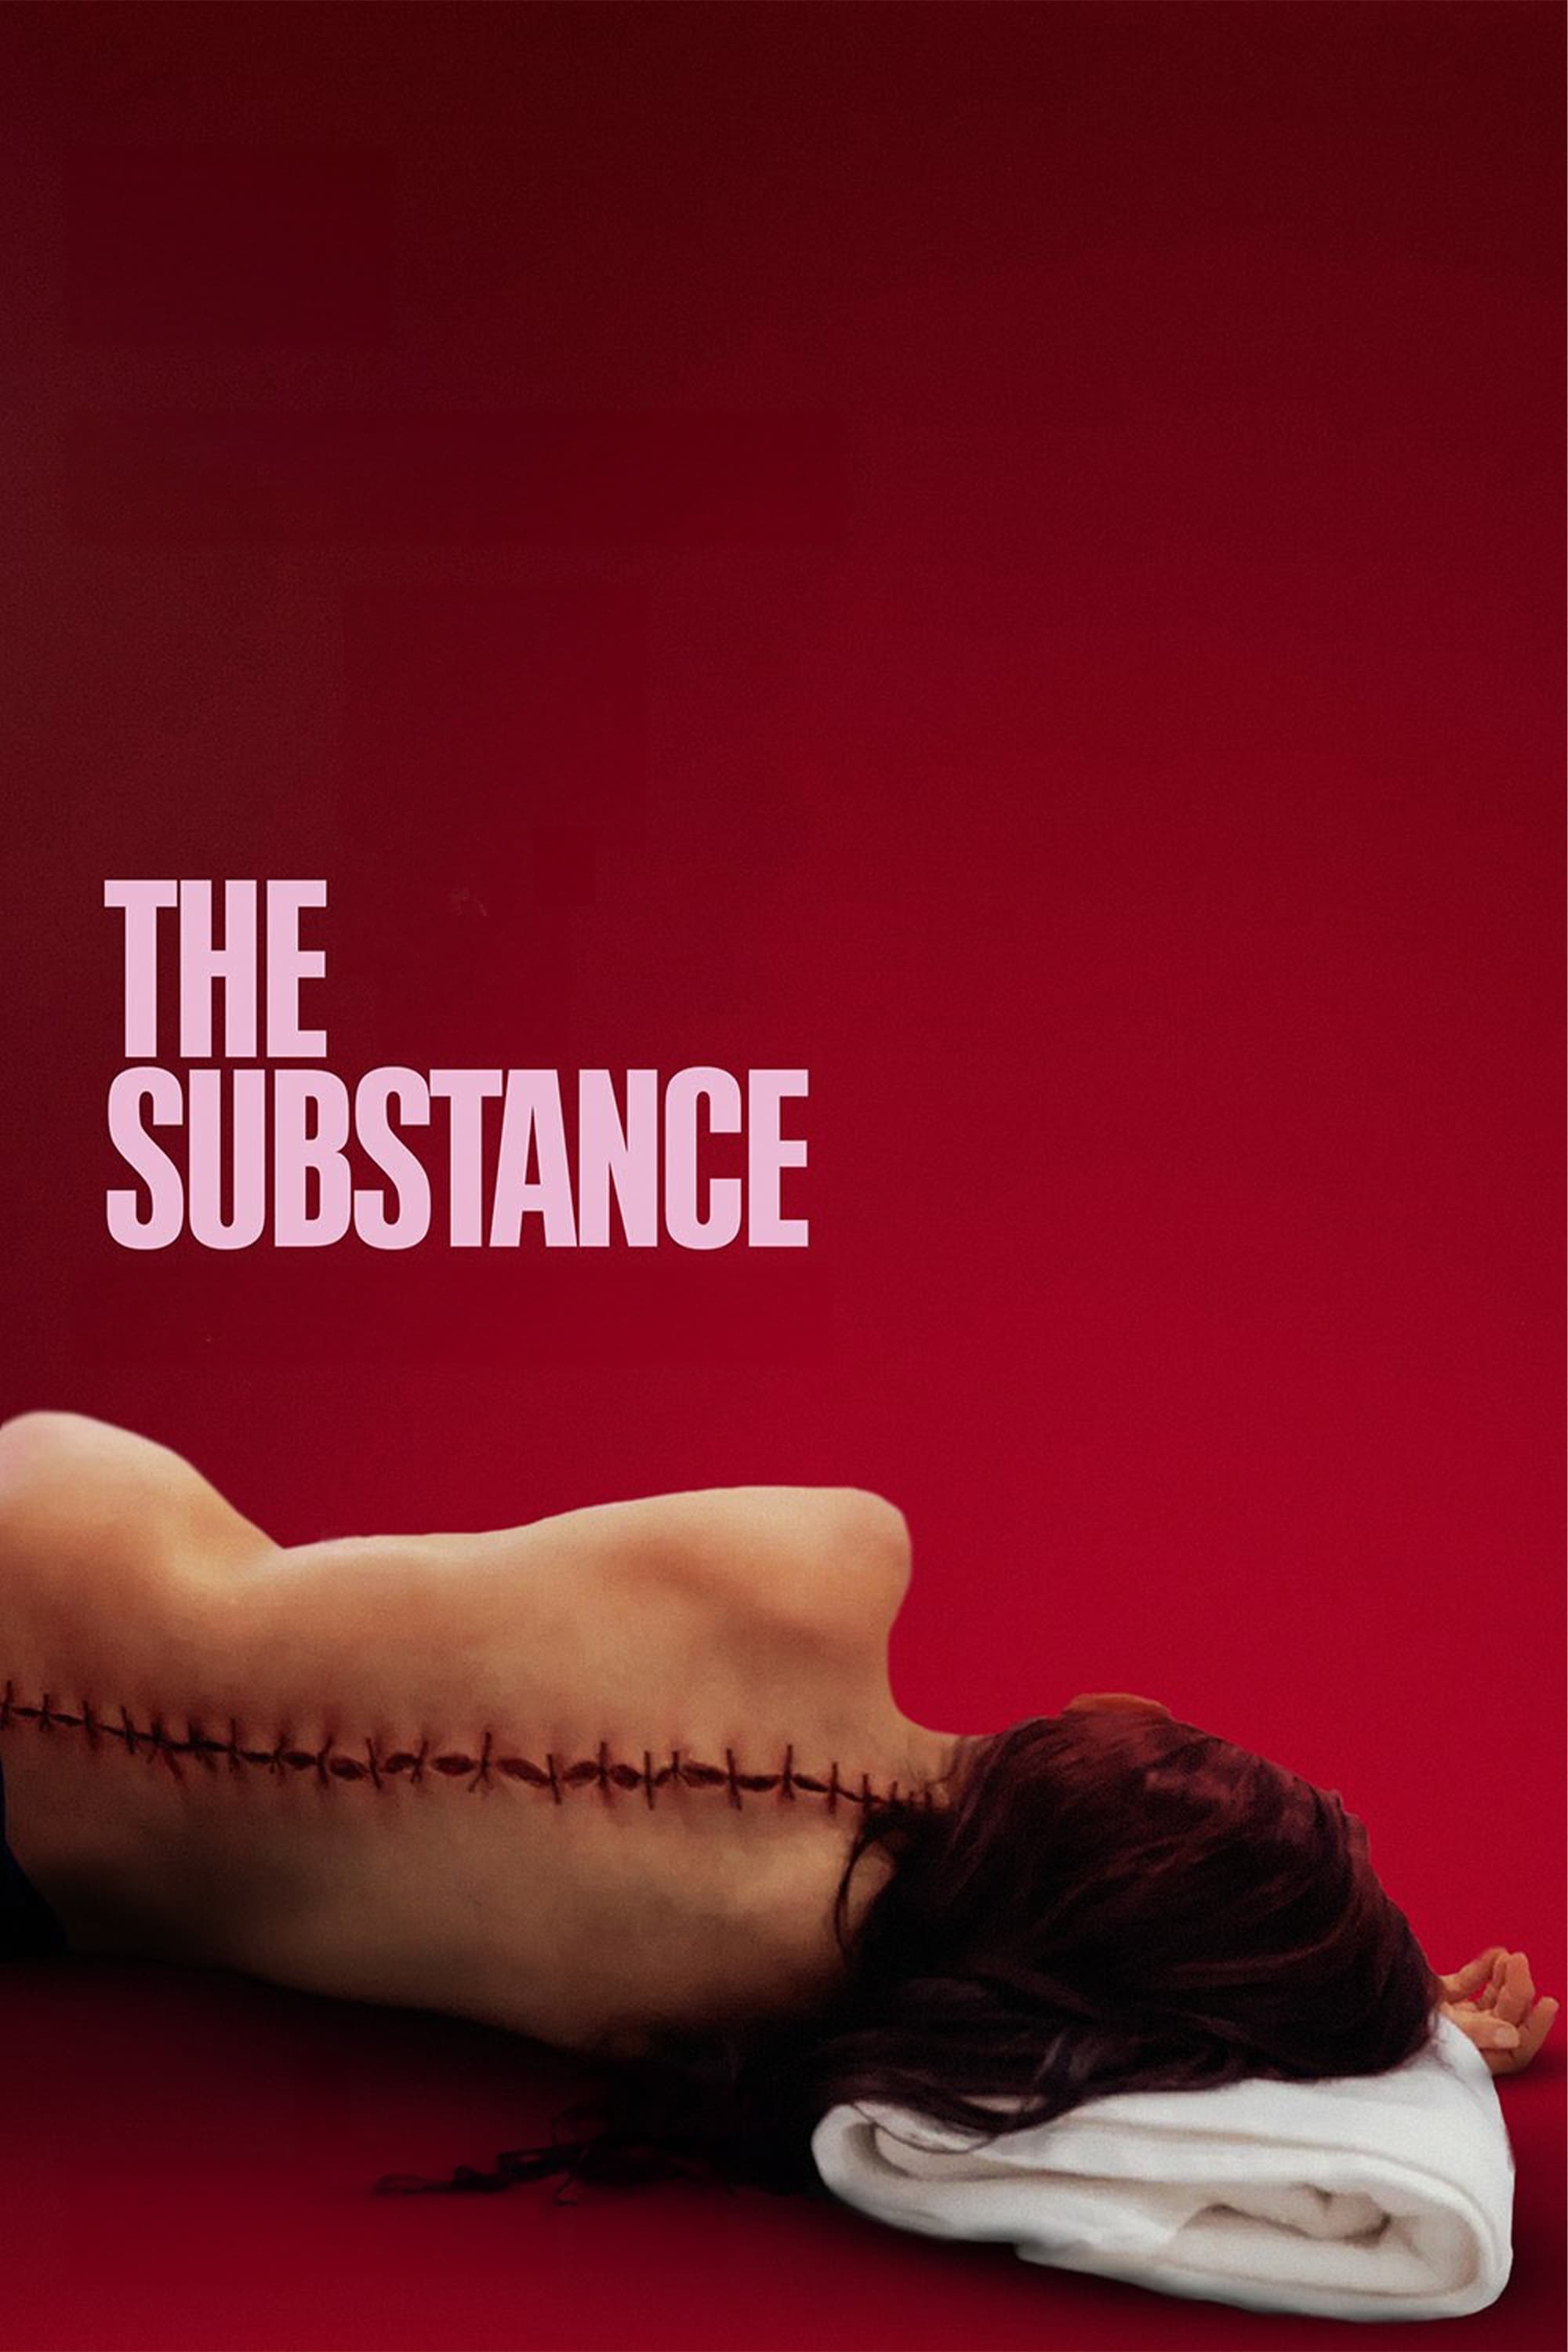 The Substance film